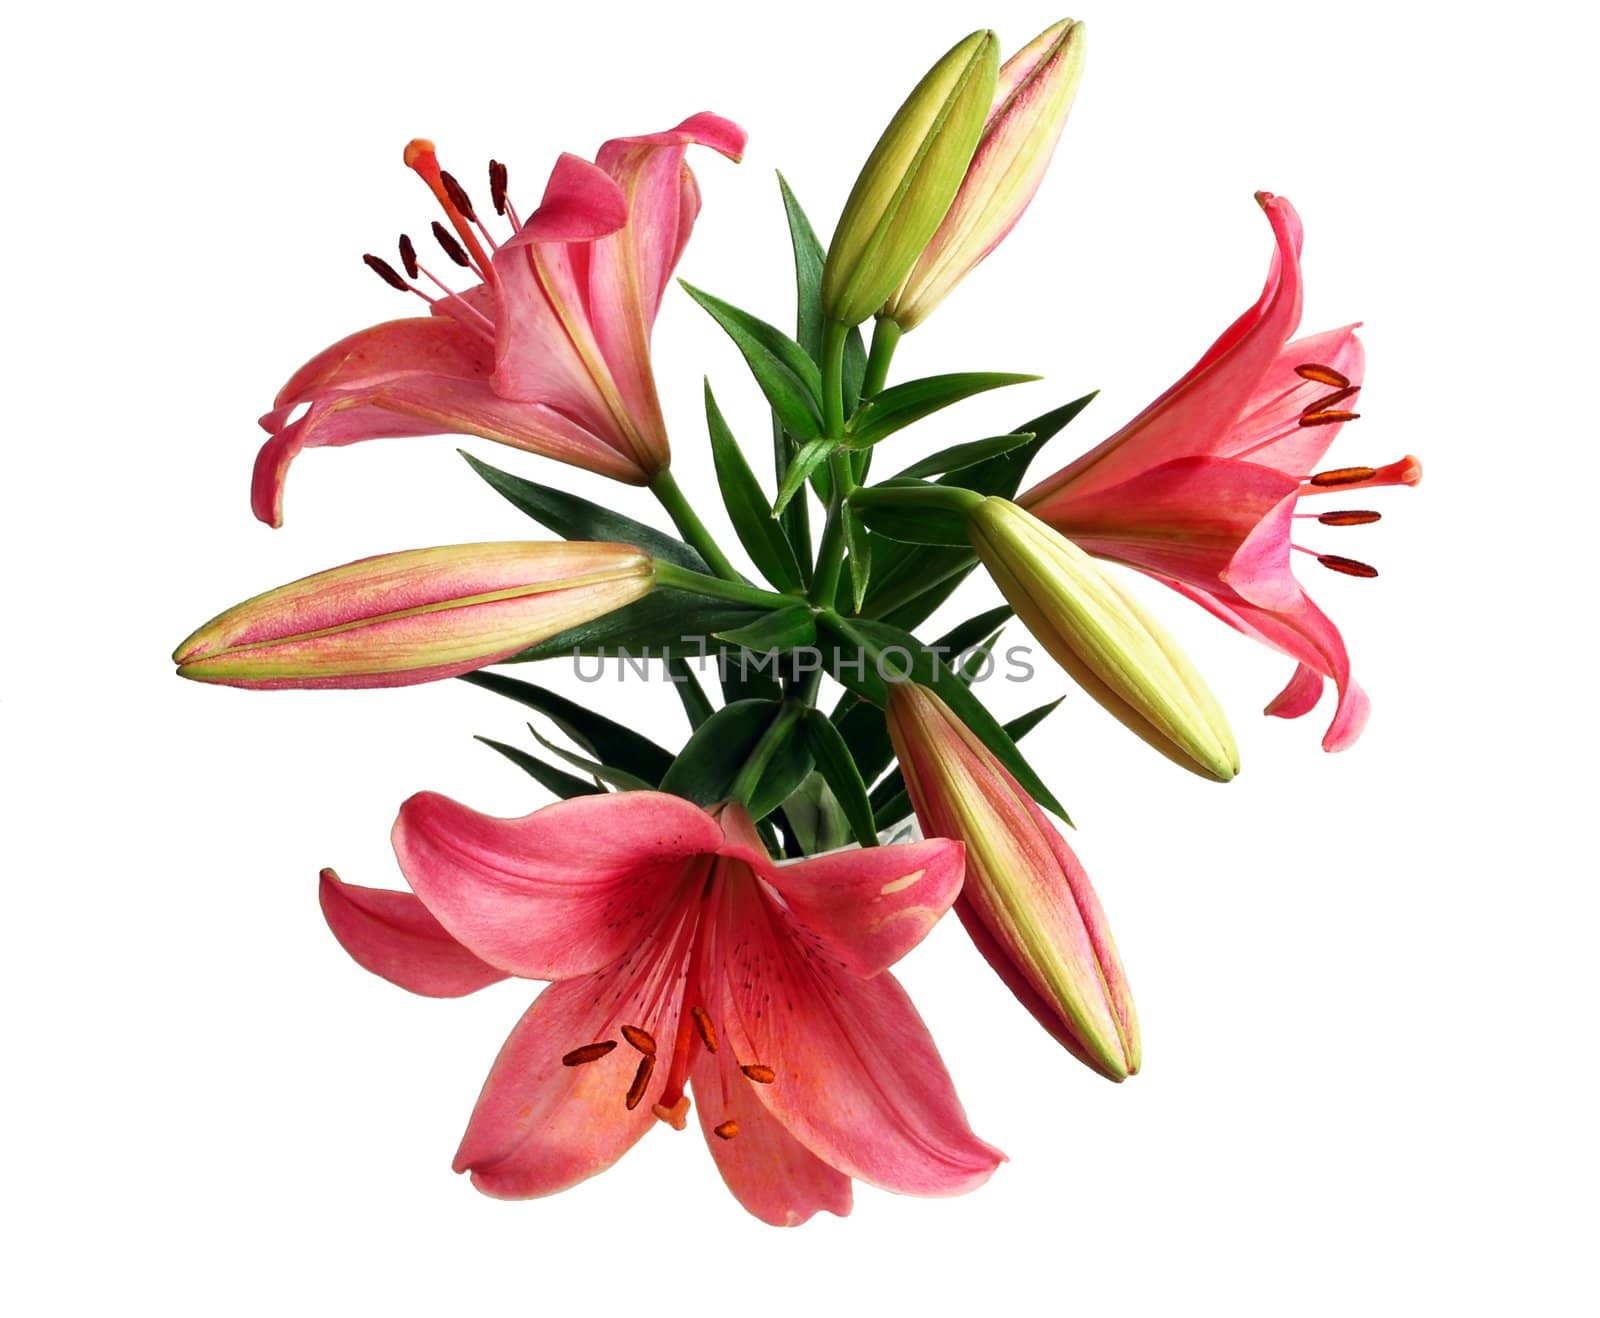 Bouquet of Three Pink Lilies Isolated on White